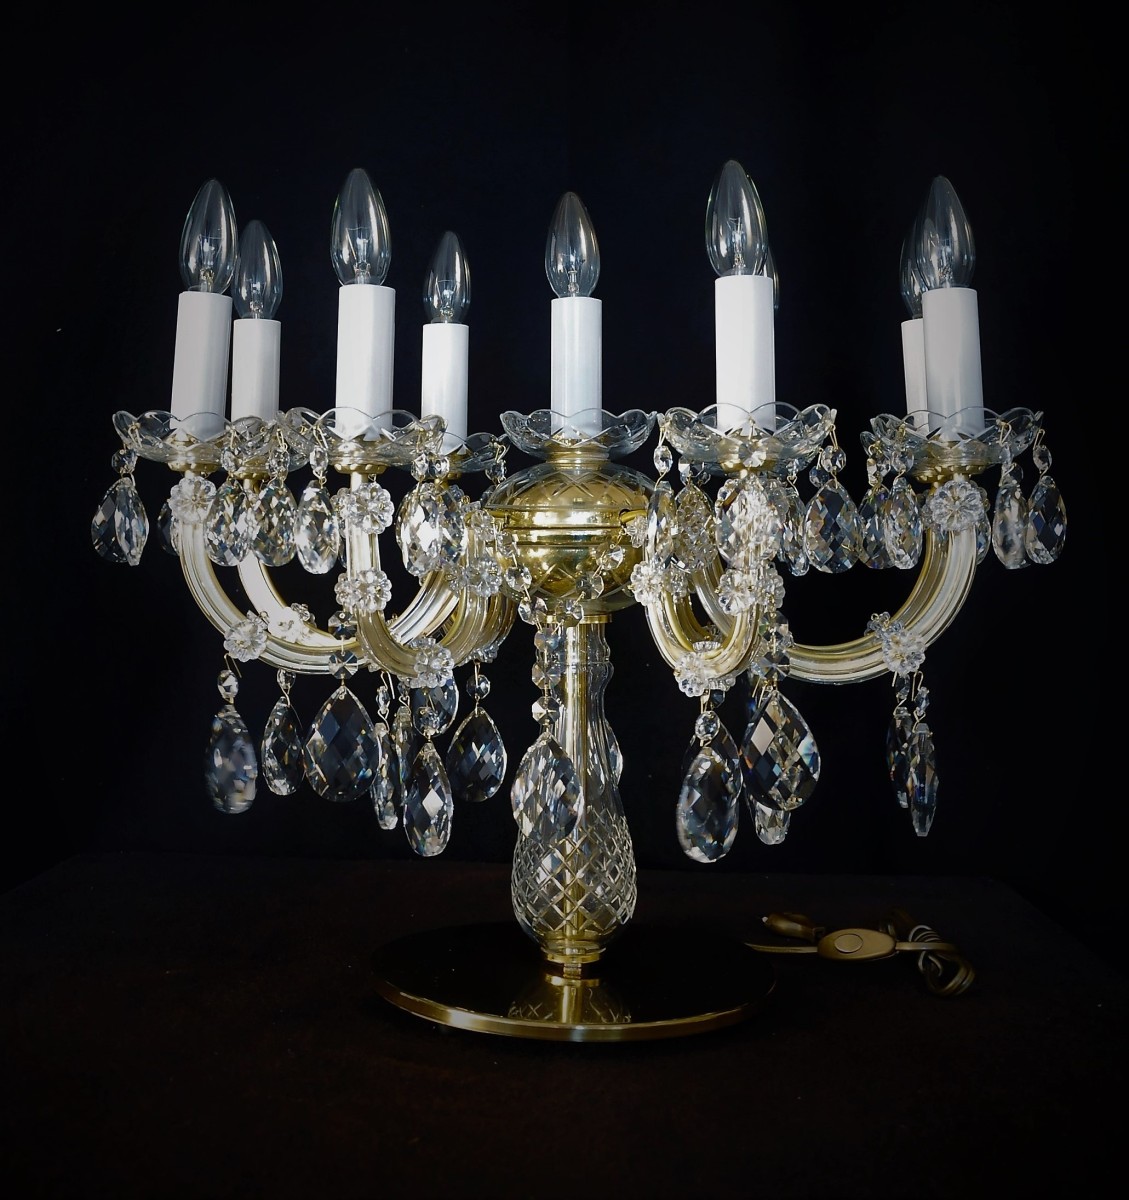 Massive Crystal Theresian Table Lamp, Vintage Candelabra Table Lamps Crystal